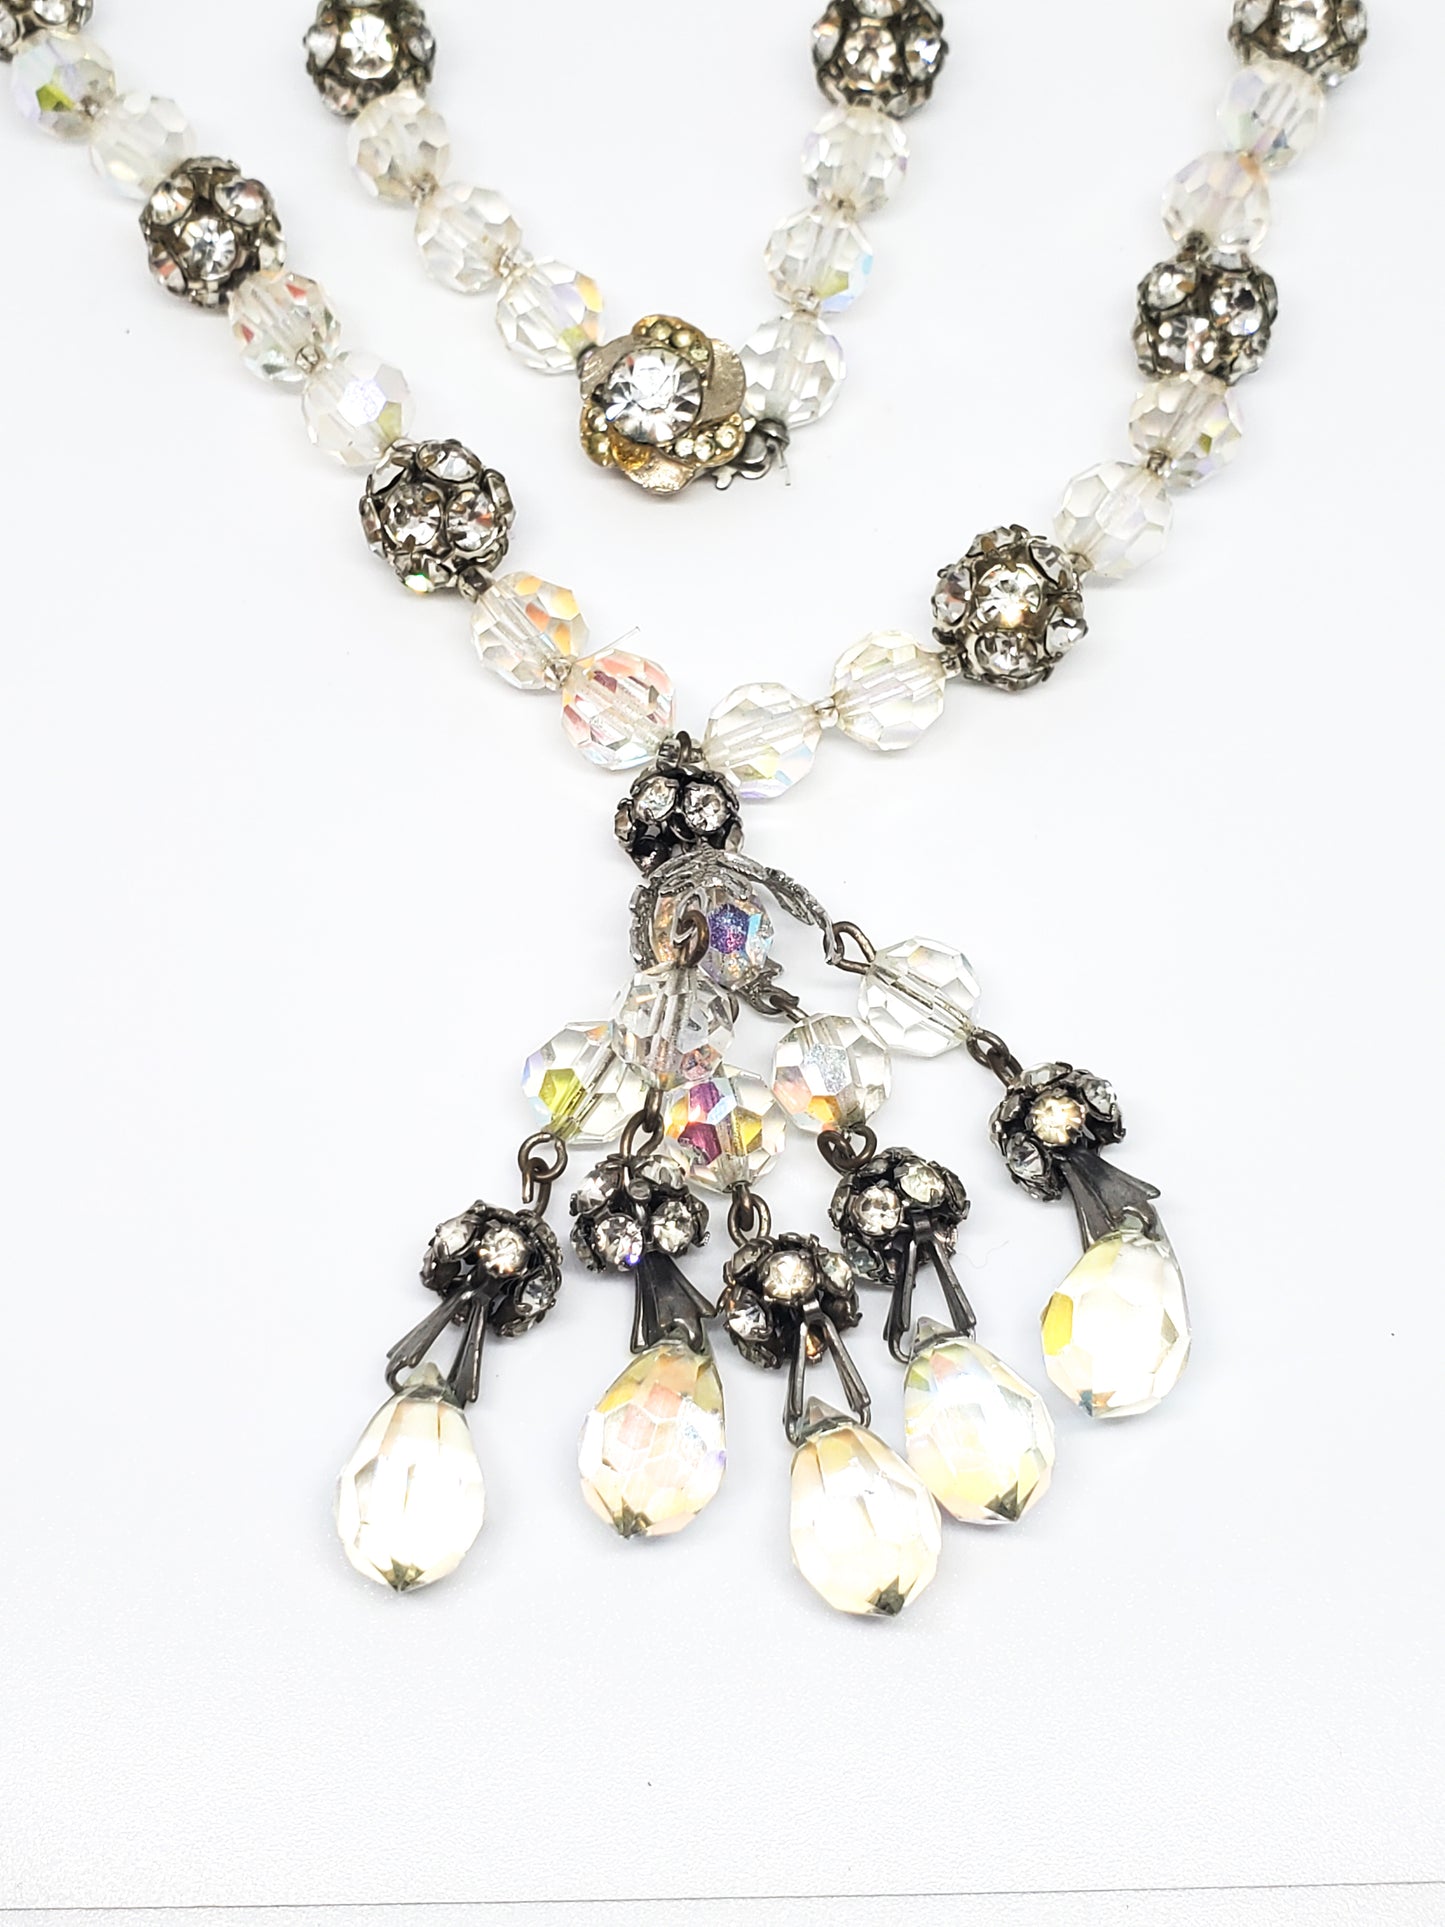 Austrian crystal and rhinestone beaded vintage necklace with pendant 21 inches